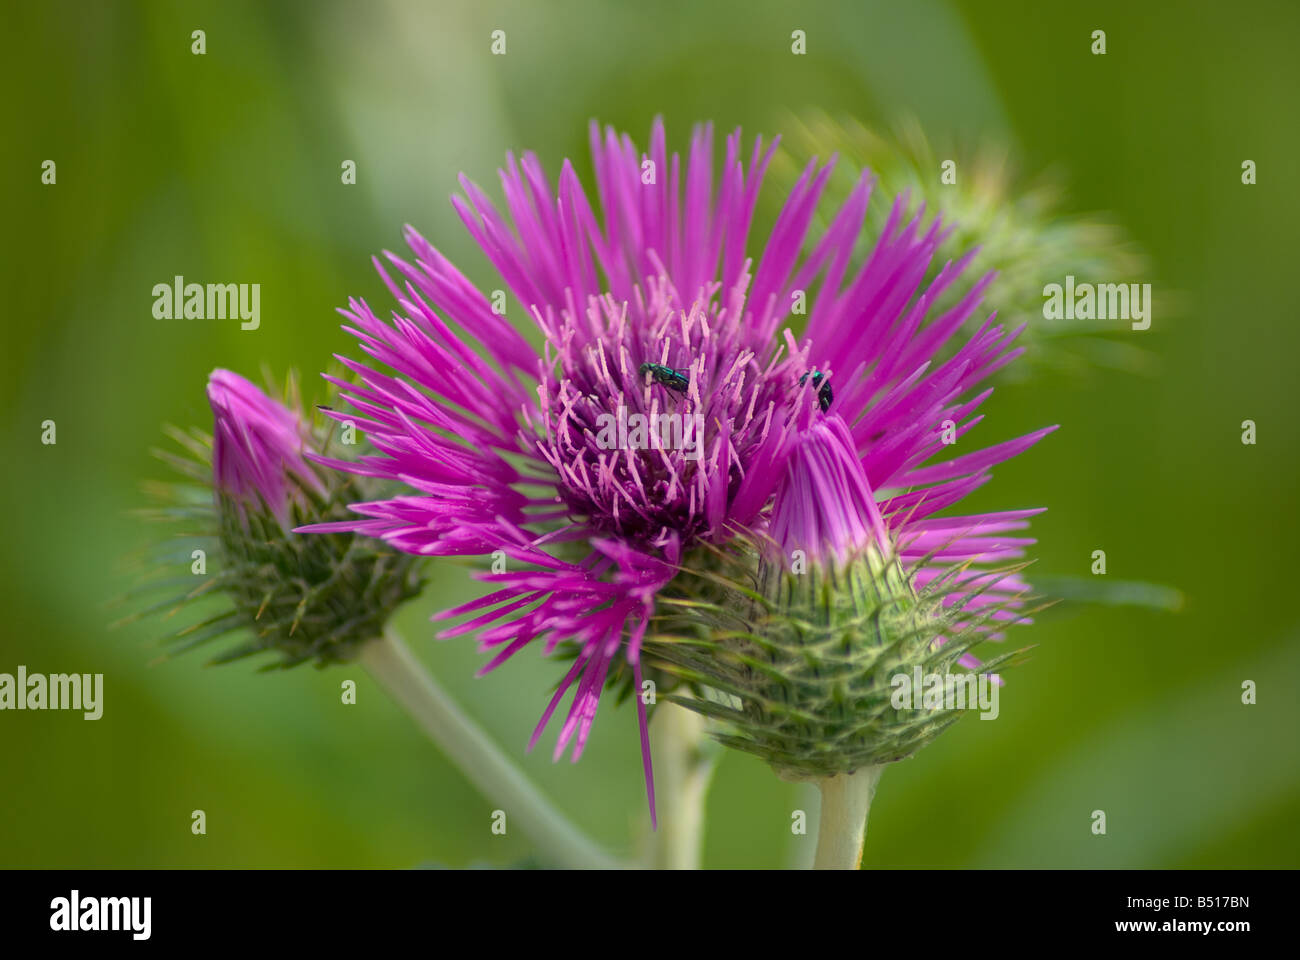 Asteraceae Cirsium palustre the Marsh thistle or European swamp thistle Stock Photo